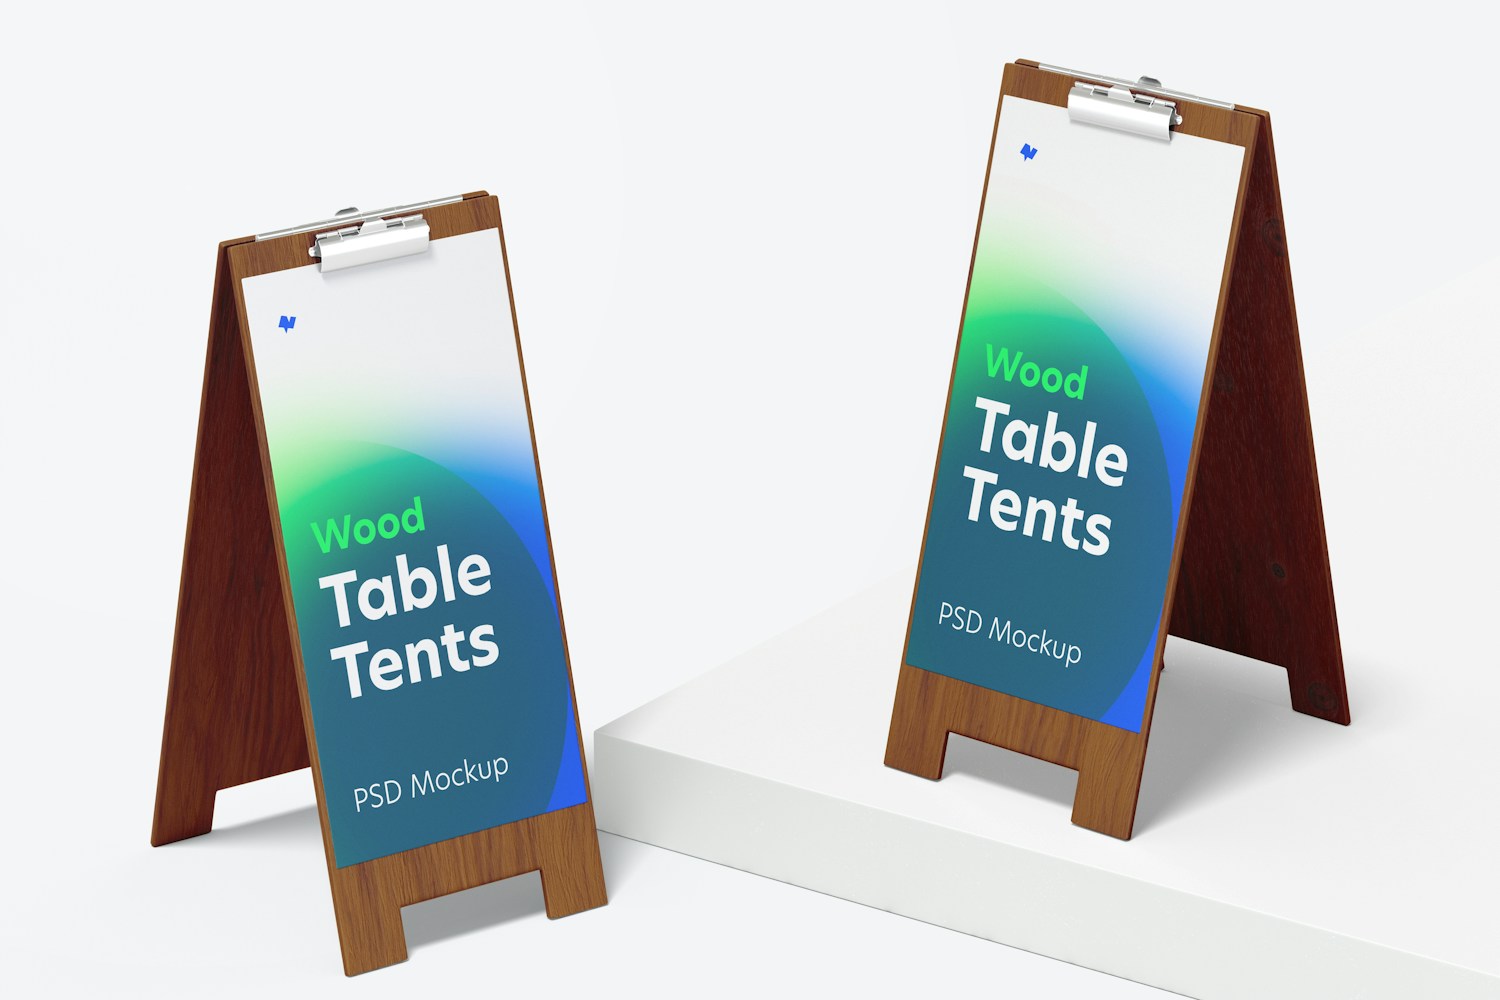 Wood Table Tents with Clip Mockup, Right View